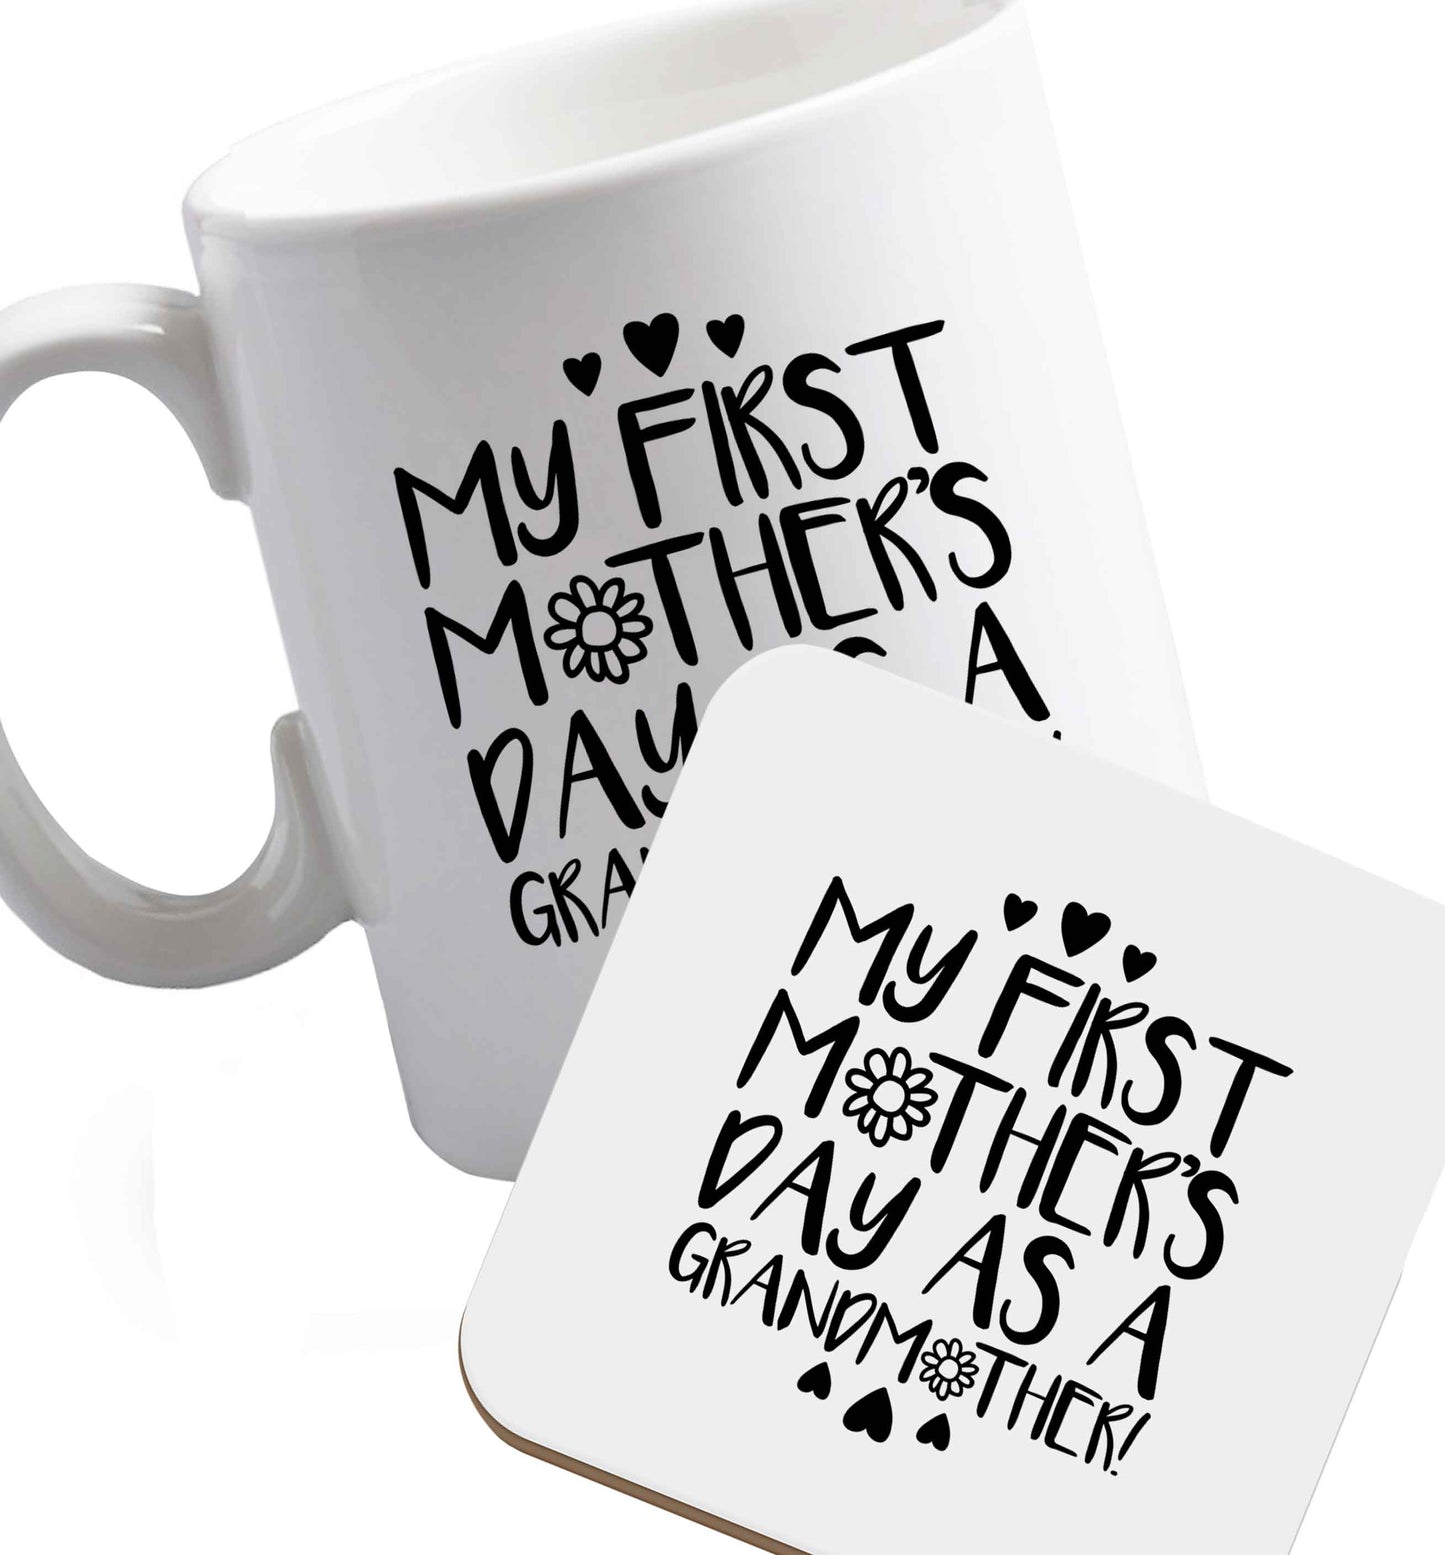 10 oz It's my first mother's day as a grandmother ceramic mug and coaster set right handed